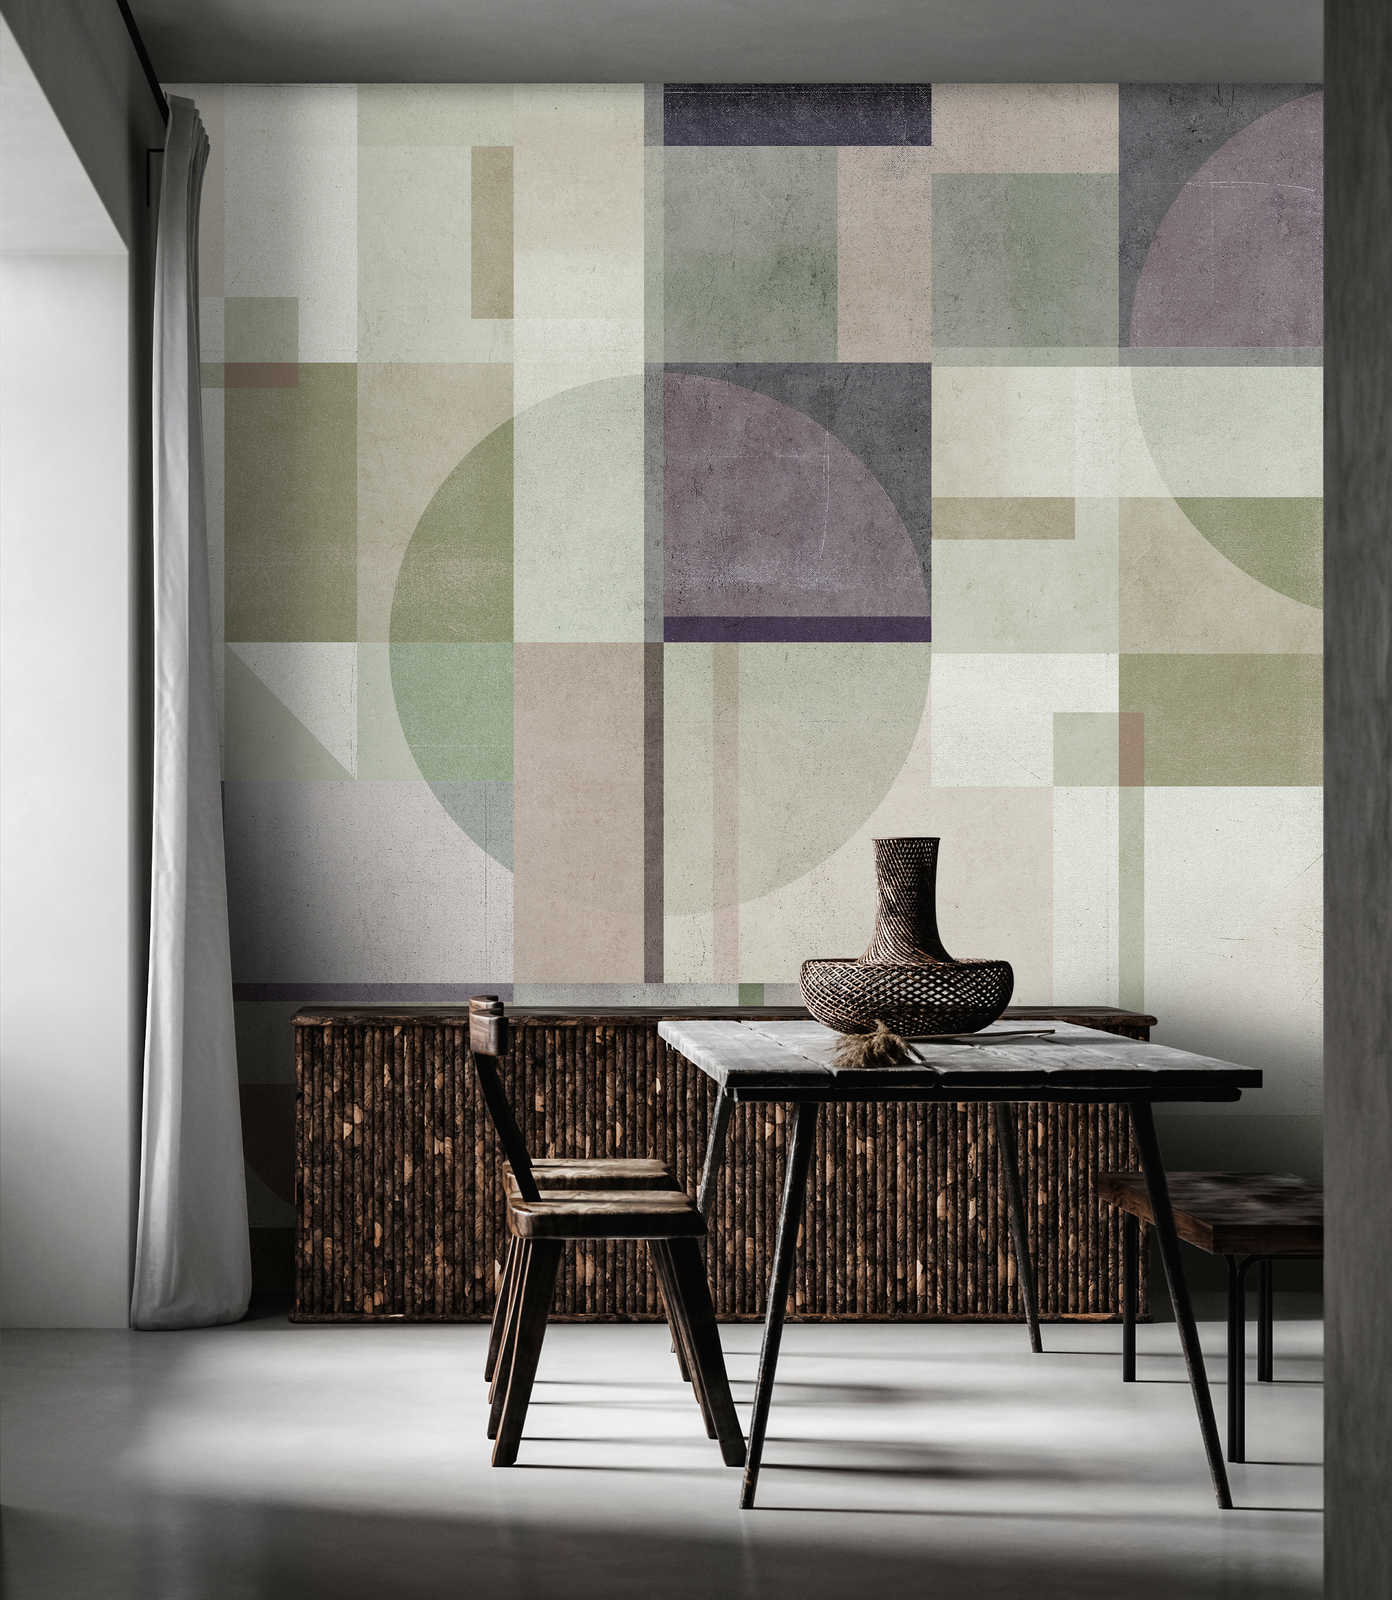             Piazza 1 - concrete look mural green & grey with graphic pattern
        